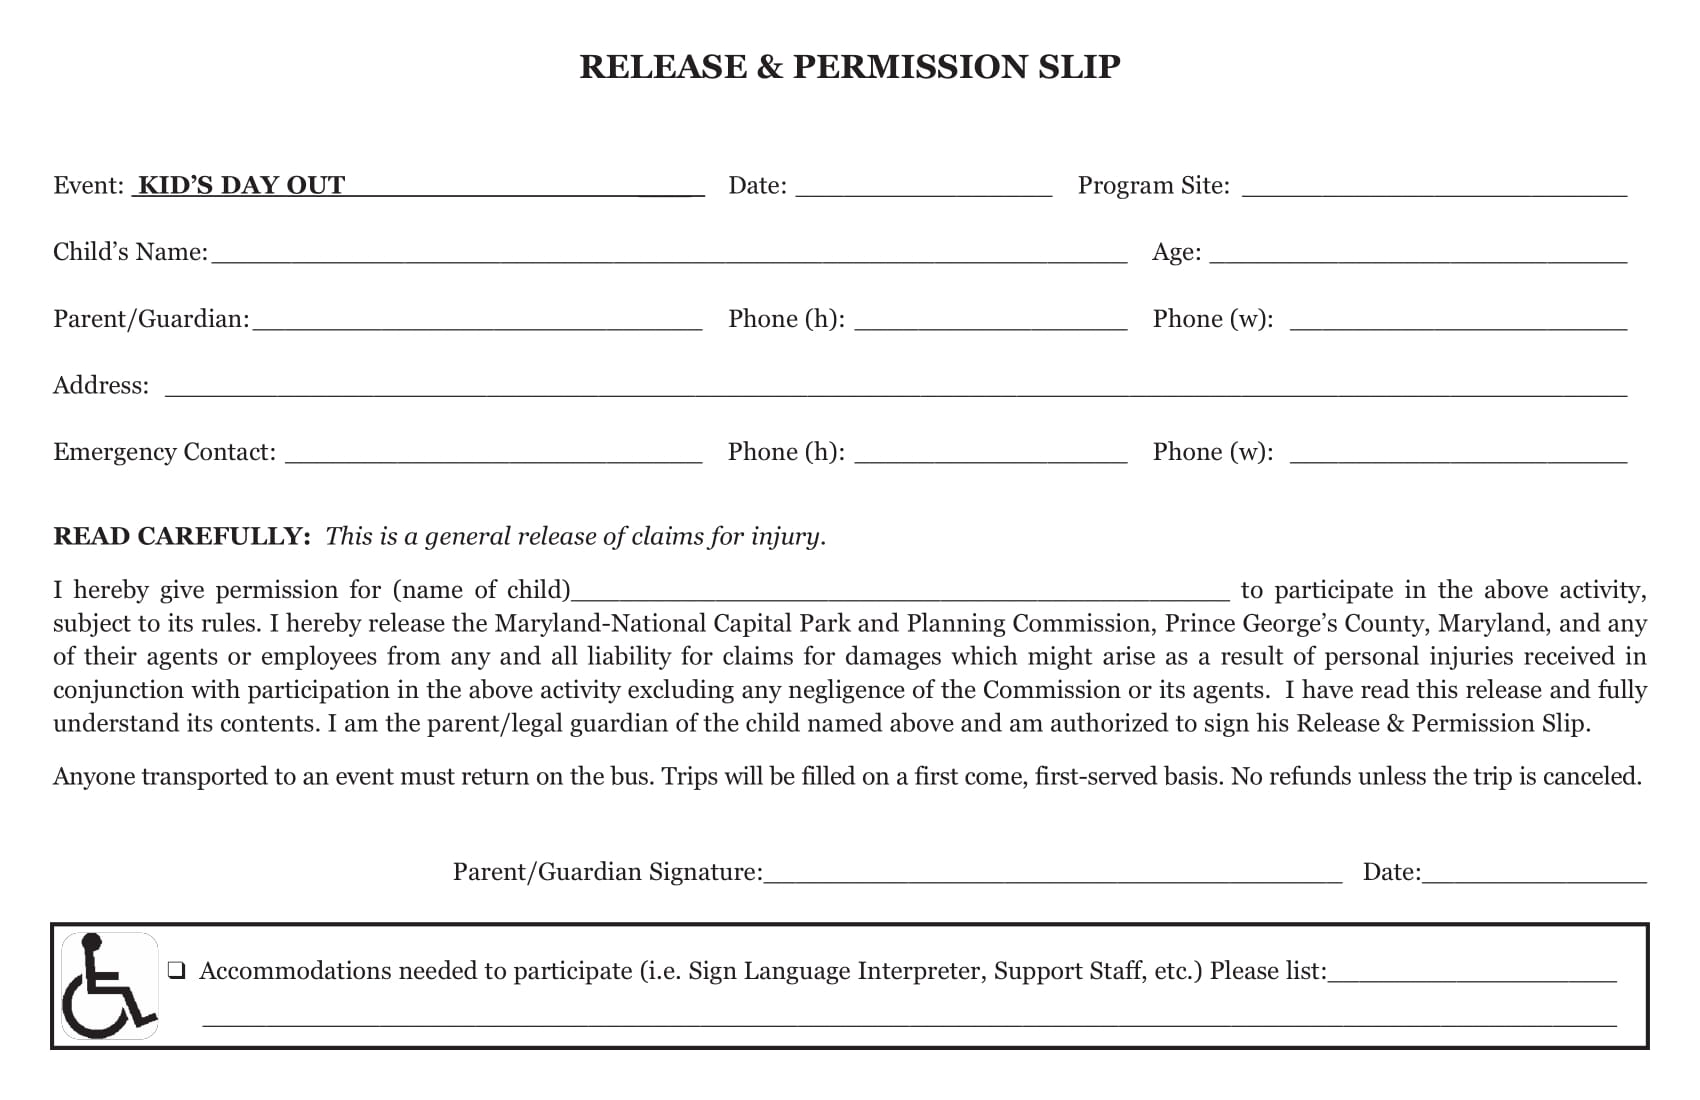 release and permission slip example